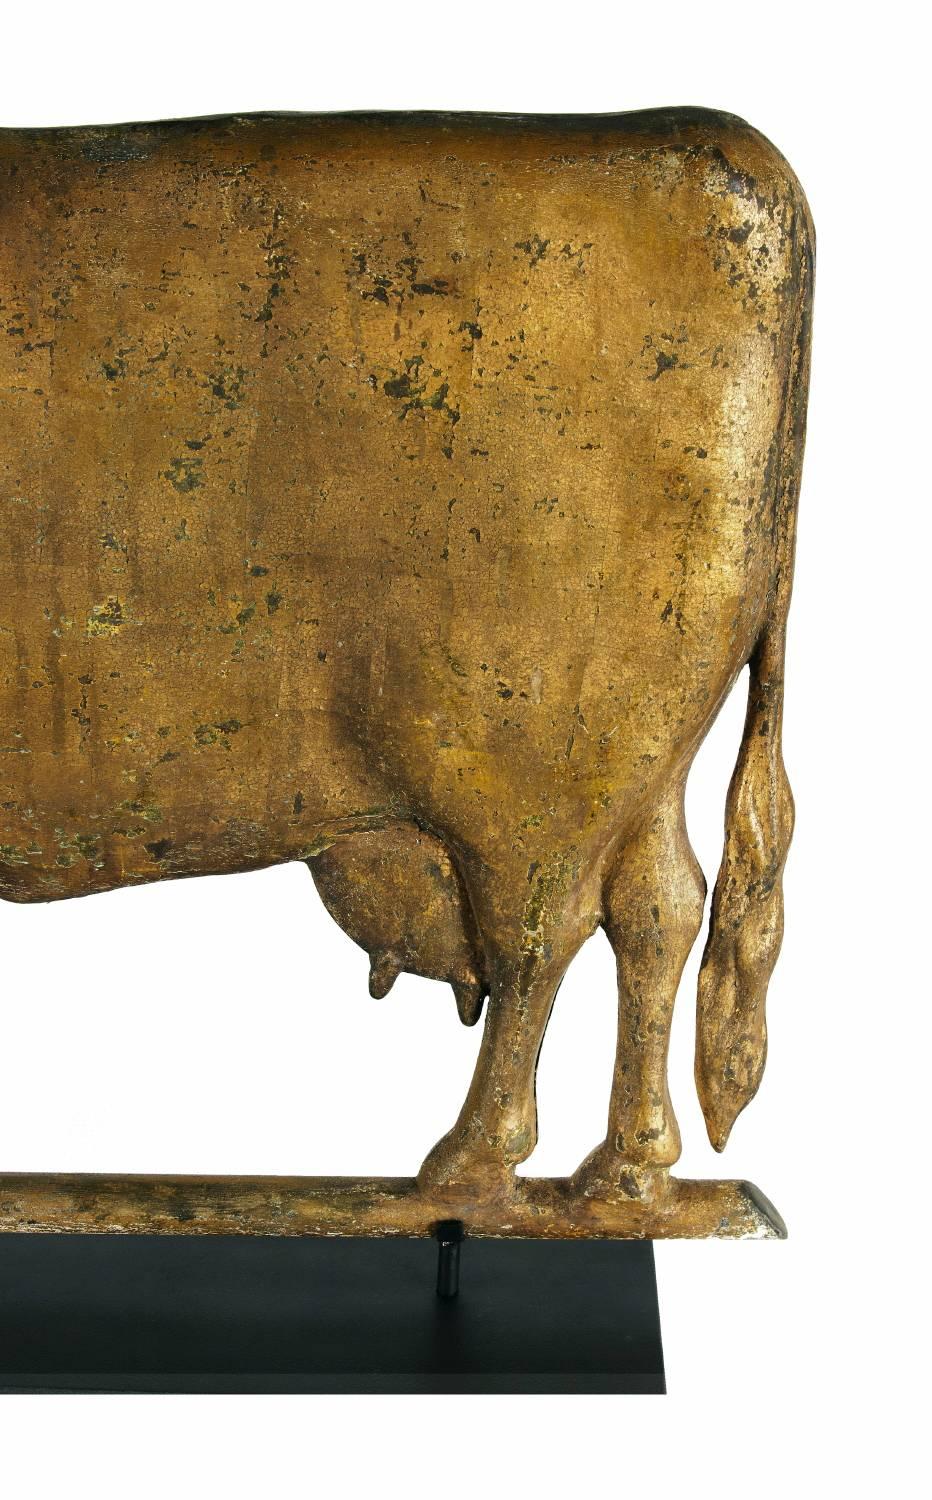 American Cow Weathervane, Excellent Scale, Great Boxy Form, with Gilded Surface